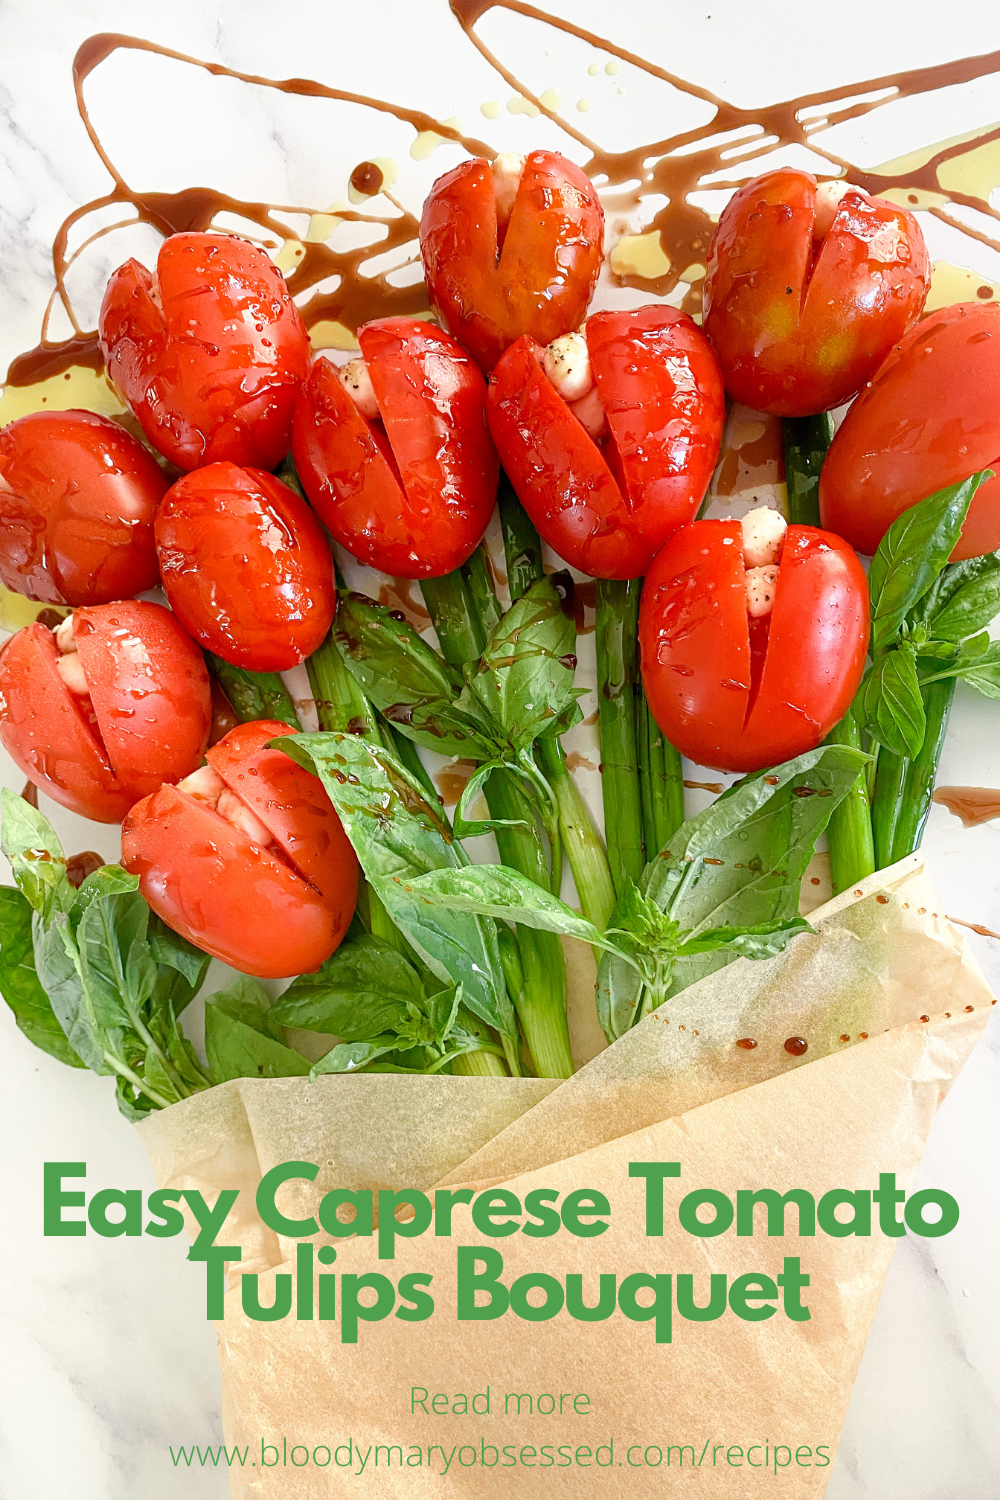 Easy Caprese Tomato Tulips Bouquet Recipe Bloody Mary Obsessed (3).png